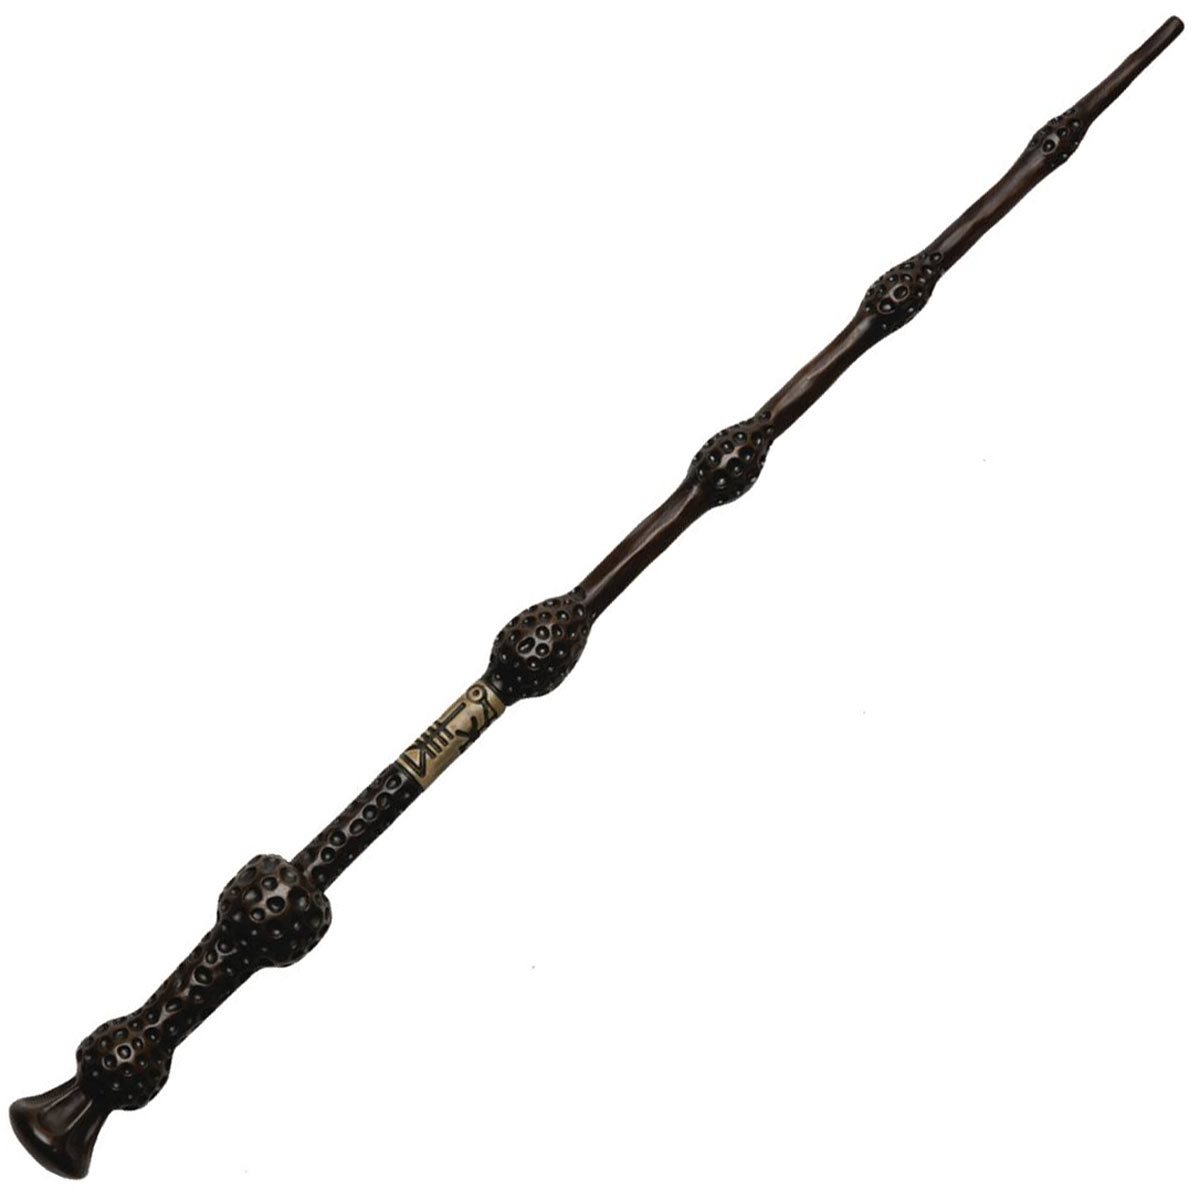 Harry Potter Wand Pens, 3 Pack - Harry, Voldemort Thailand